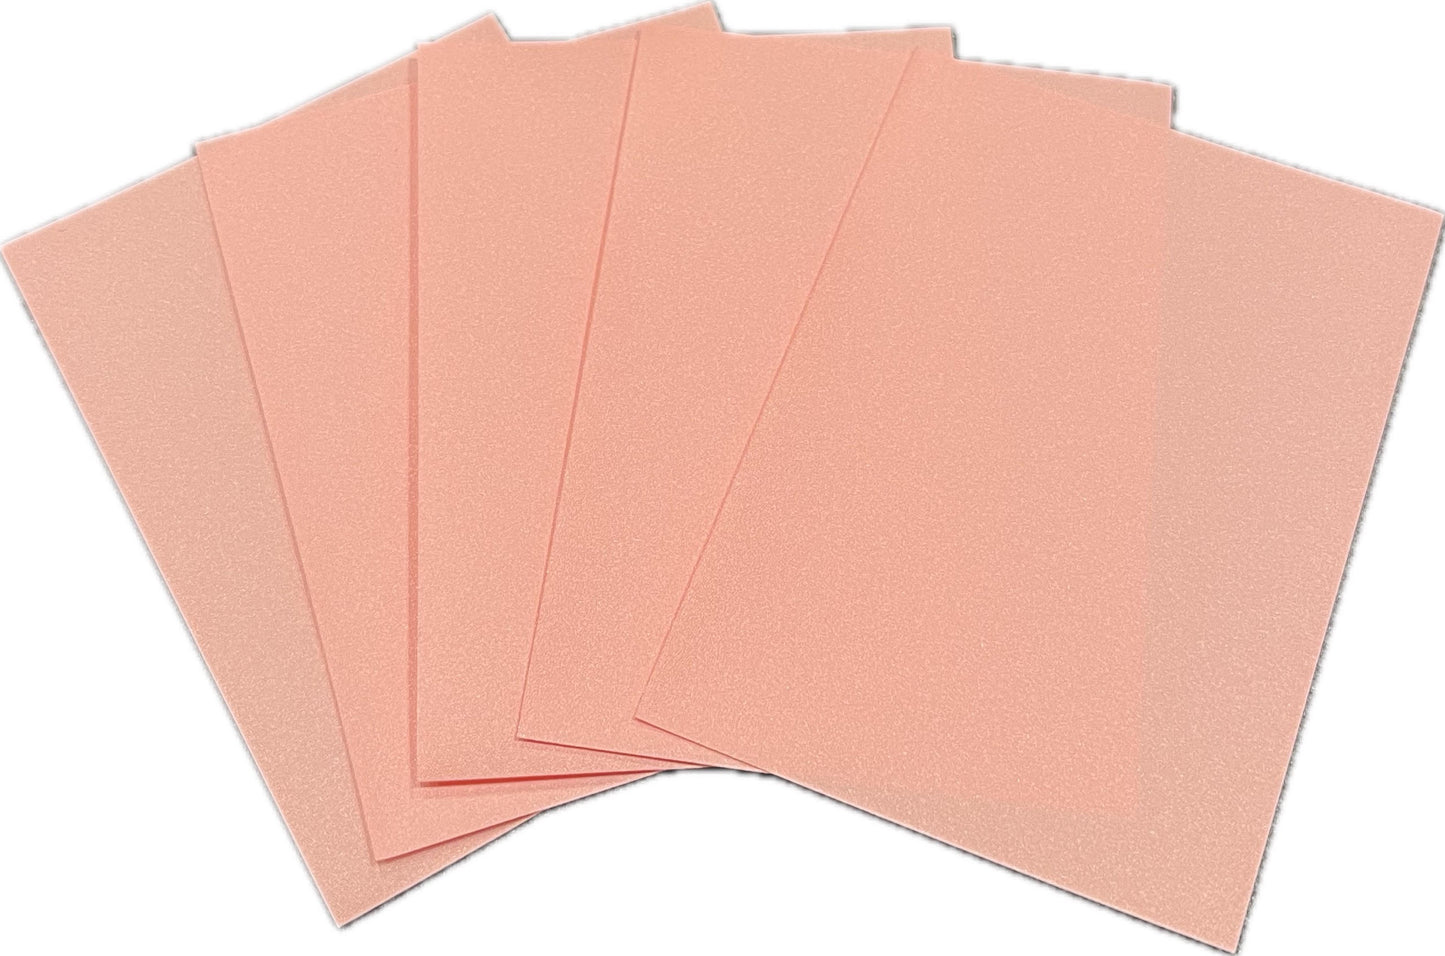 Standard Size Card Sleeves - Pink - 100 Count - 66 x 91mm